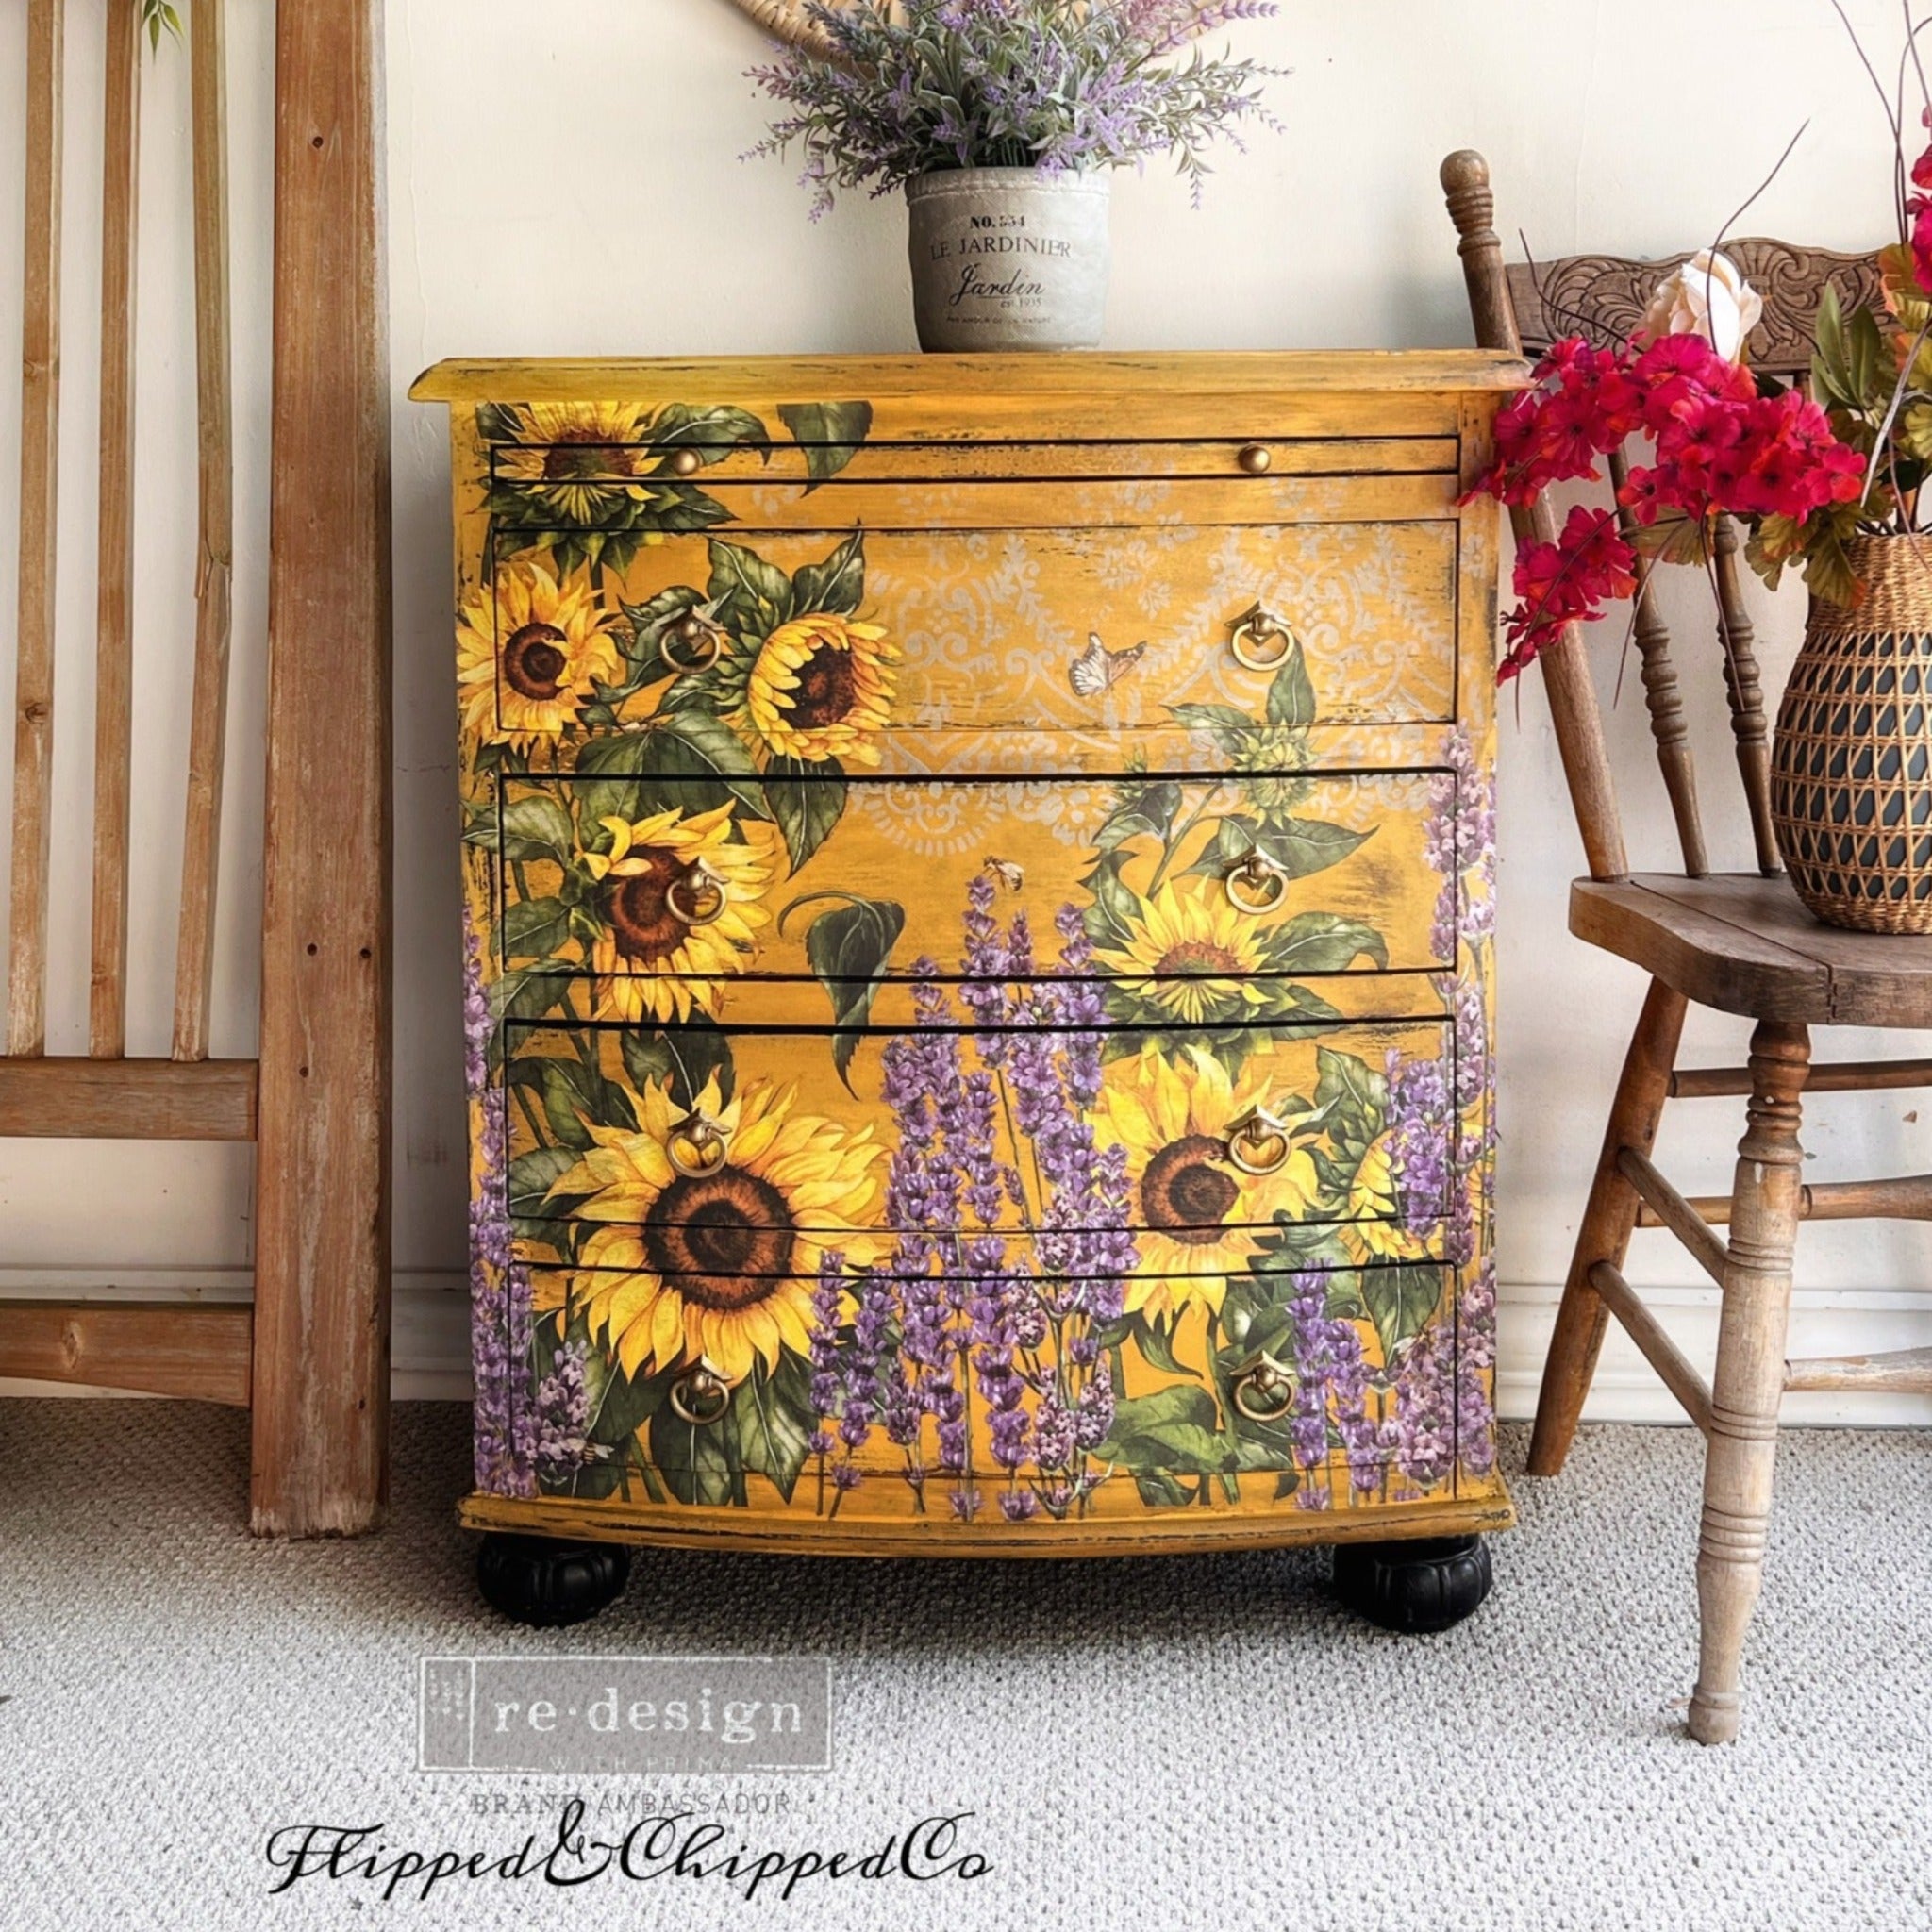 A chest dresser refurbished by Flipped & Chipped is painted mustard yellow and features ReDesign with Prima's Champs de Lavende transfer along with a sunflower transfer on the front of it.